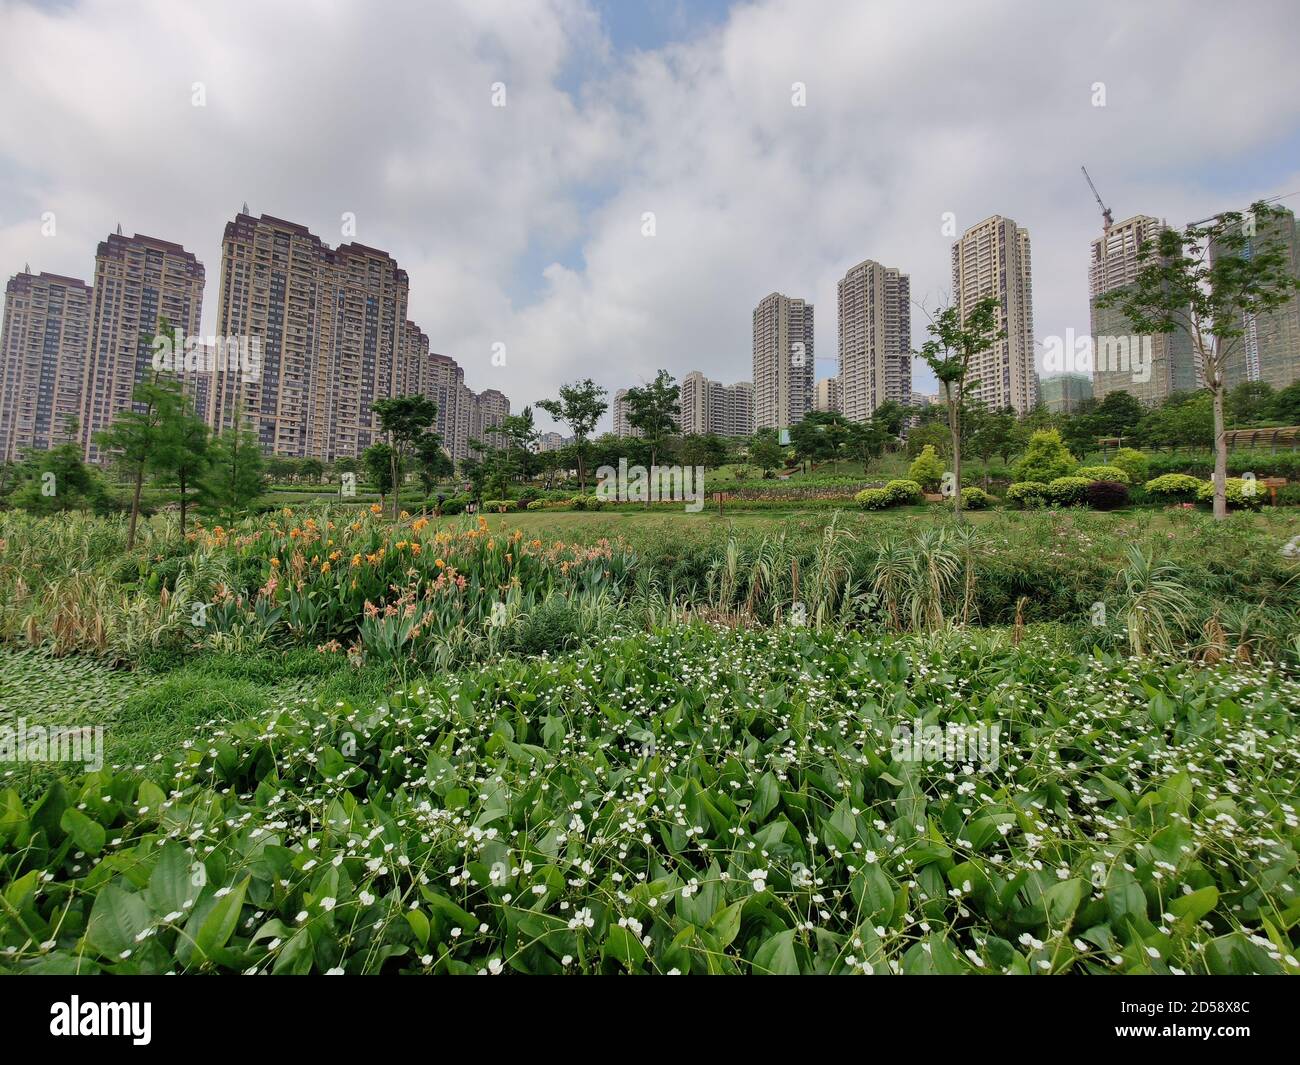 Nanning. 21st May, 2020. Photo taken on May 21, 2020 shows the scenery of Nakaohe wetland park in Nanning of south China's Guangxi Zhuang Autonomous Region. TO GO WITH 'Across China: 'Sponge city' program bears fruit' Credit: Guo Yifan/Xinhua/Alamy Live News Stock Photo